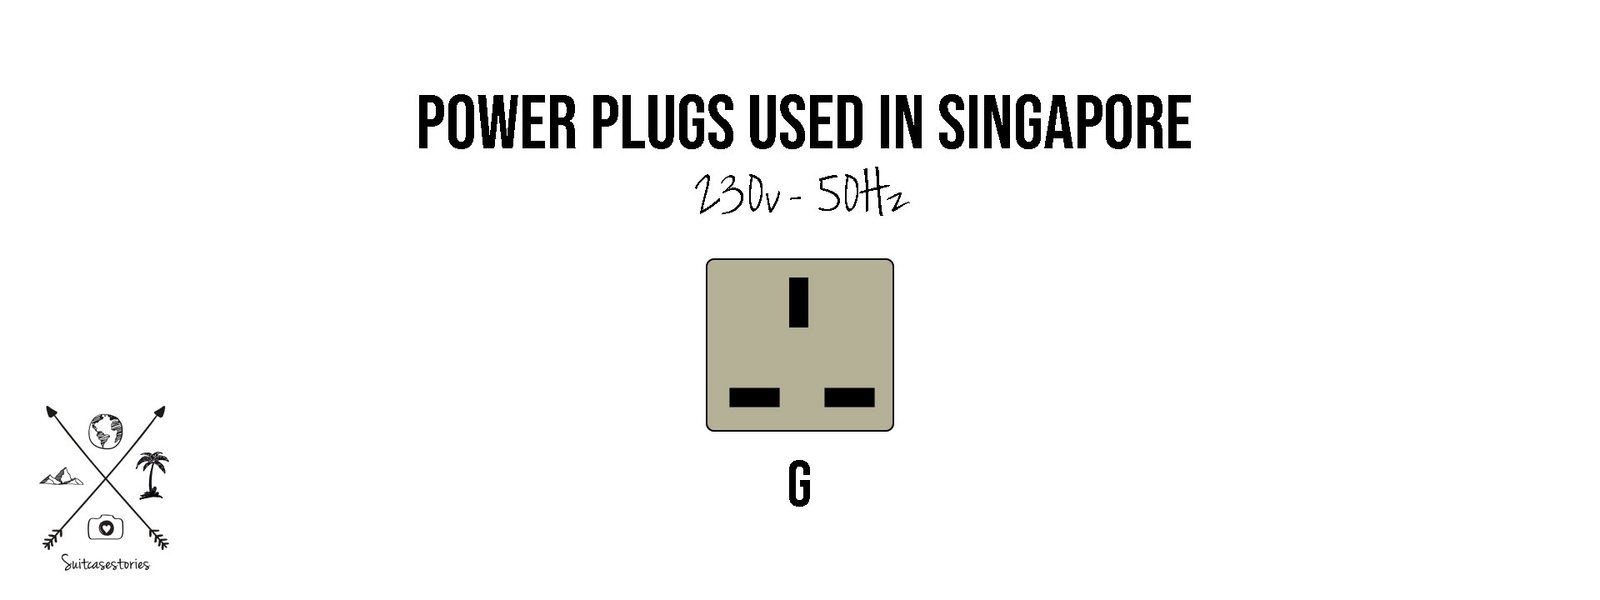 electricity in Singapore